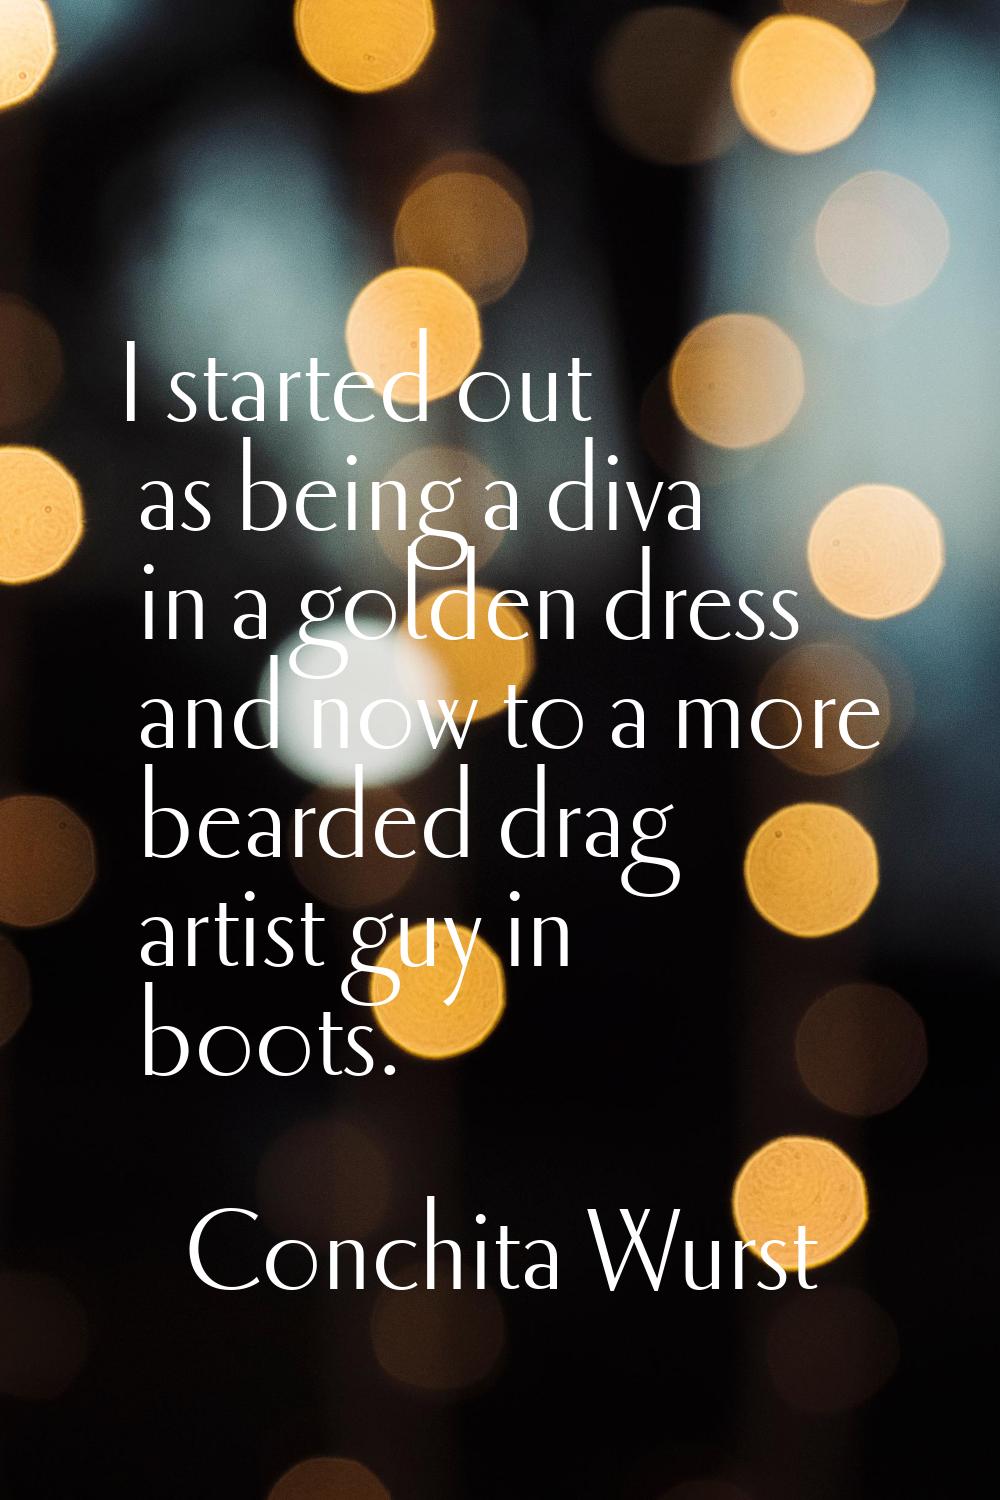 I started out as being a diva in a golden dress and now to a more bearded drag artist guy in boots.